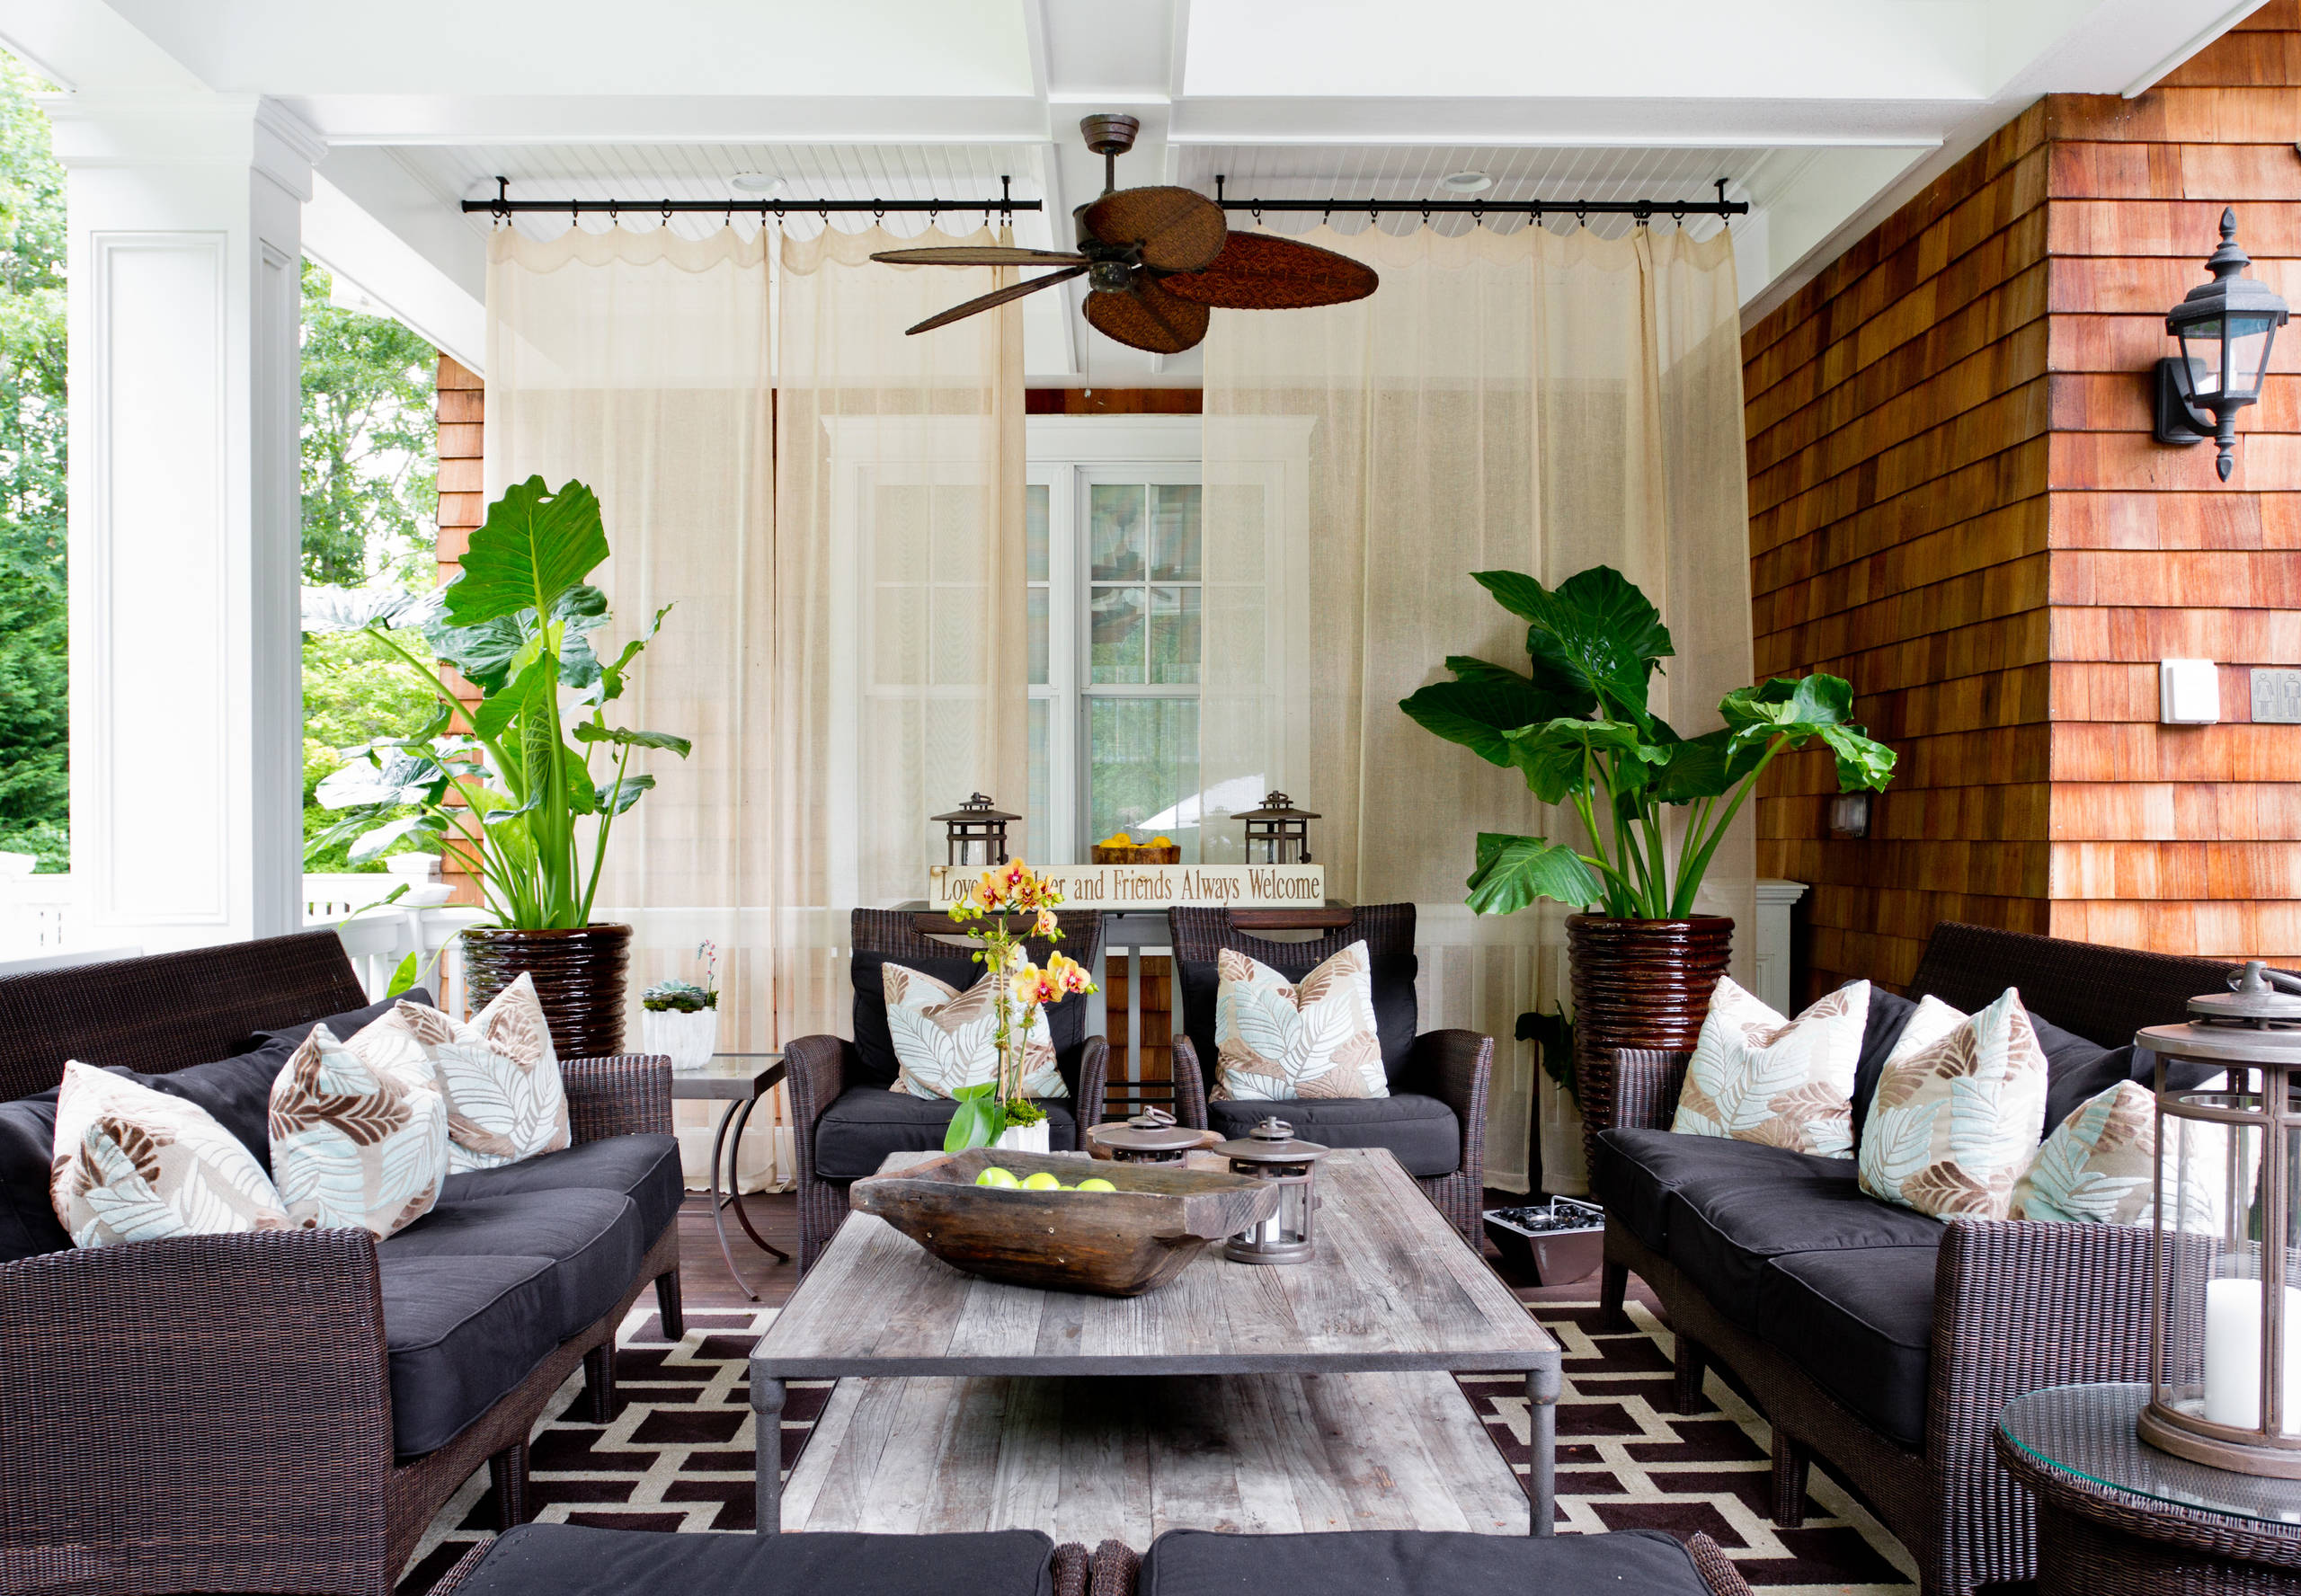 Outdoor Living Rooms Come Of Age Houzz Au